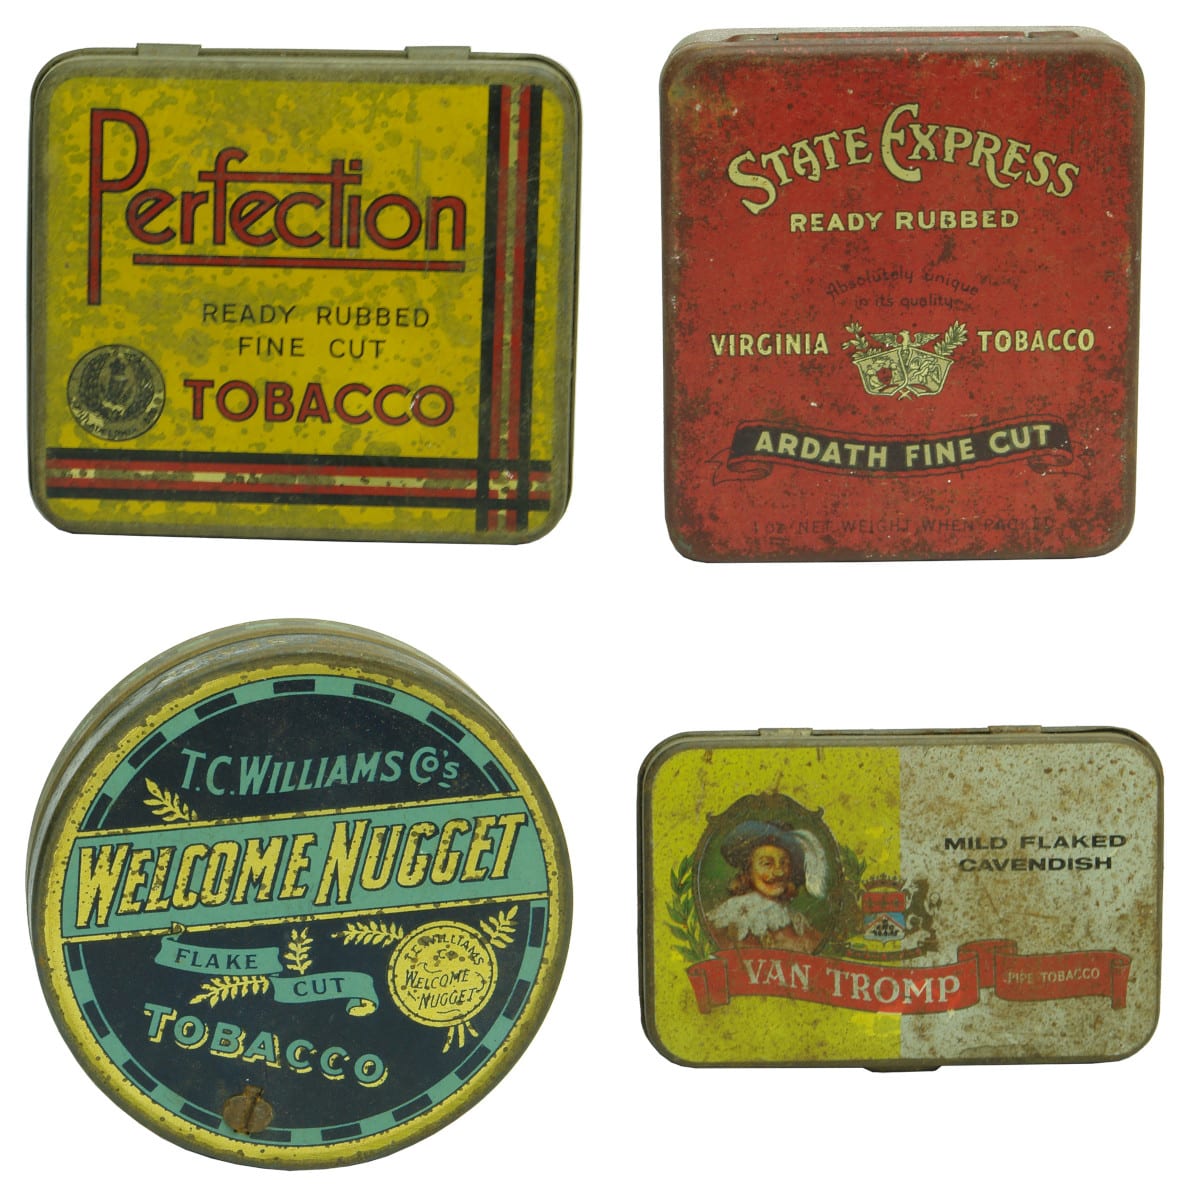 4 Tobacco Tins: Perfection; State Express; Welcome Nugget; Van Tromp.